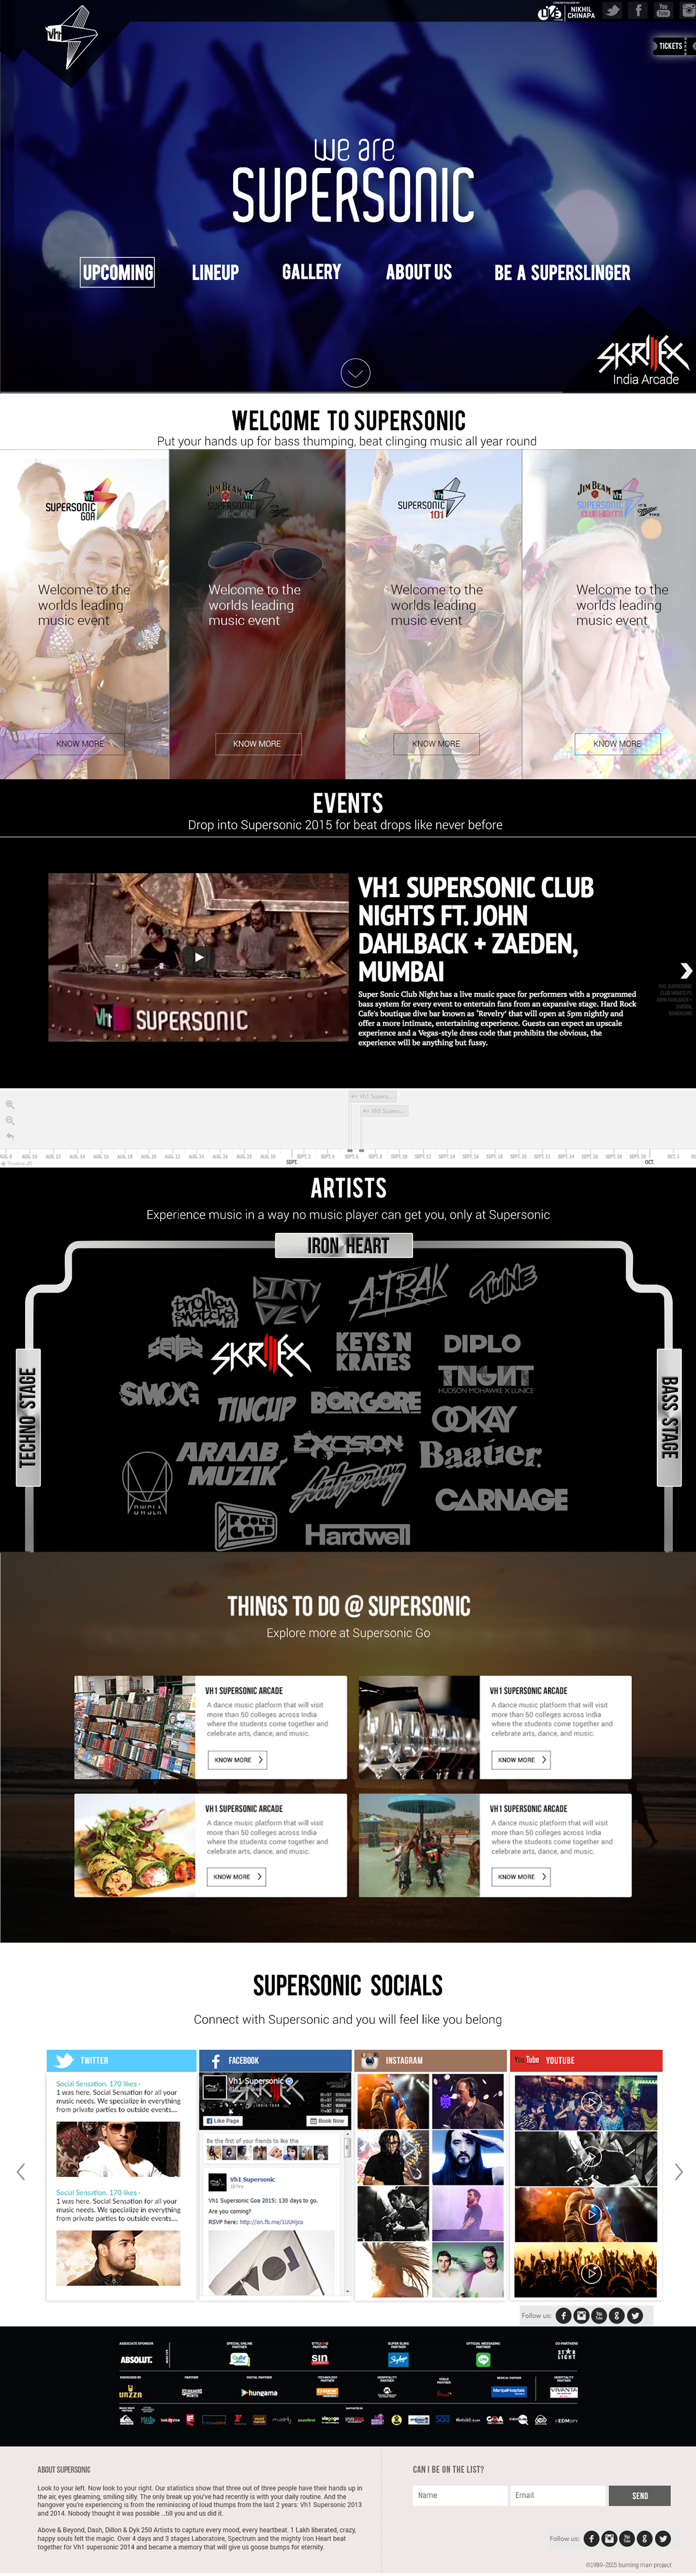 Website Design home page Music Festival India